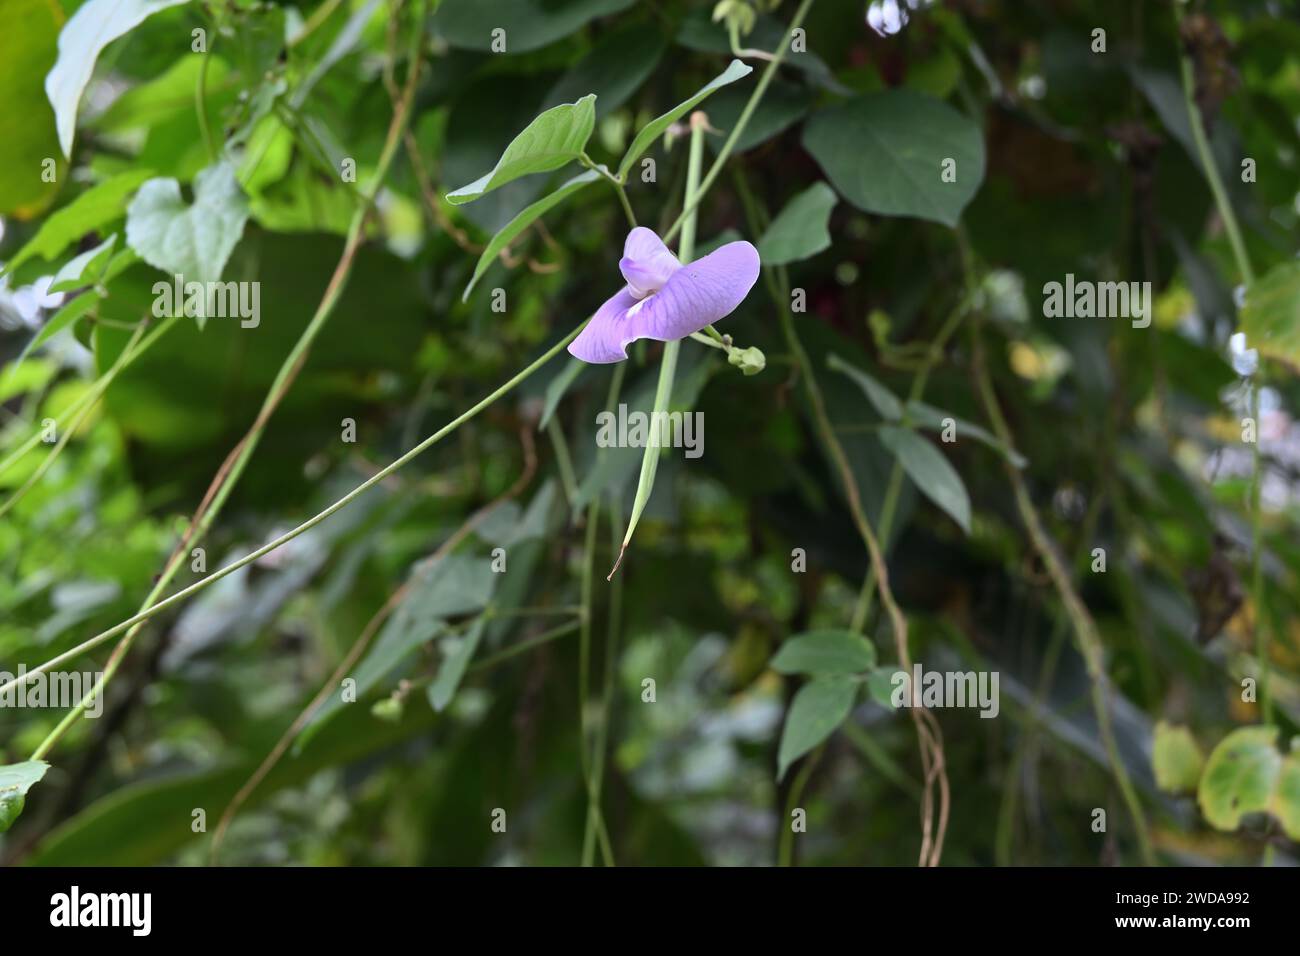 Underneath view of a hanging purplish mixed lavender blue colored Spurred butterfly pea (Centrosema virginianum) flower Stock Photo